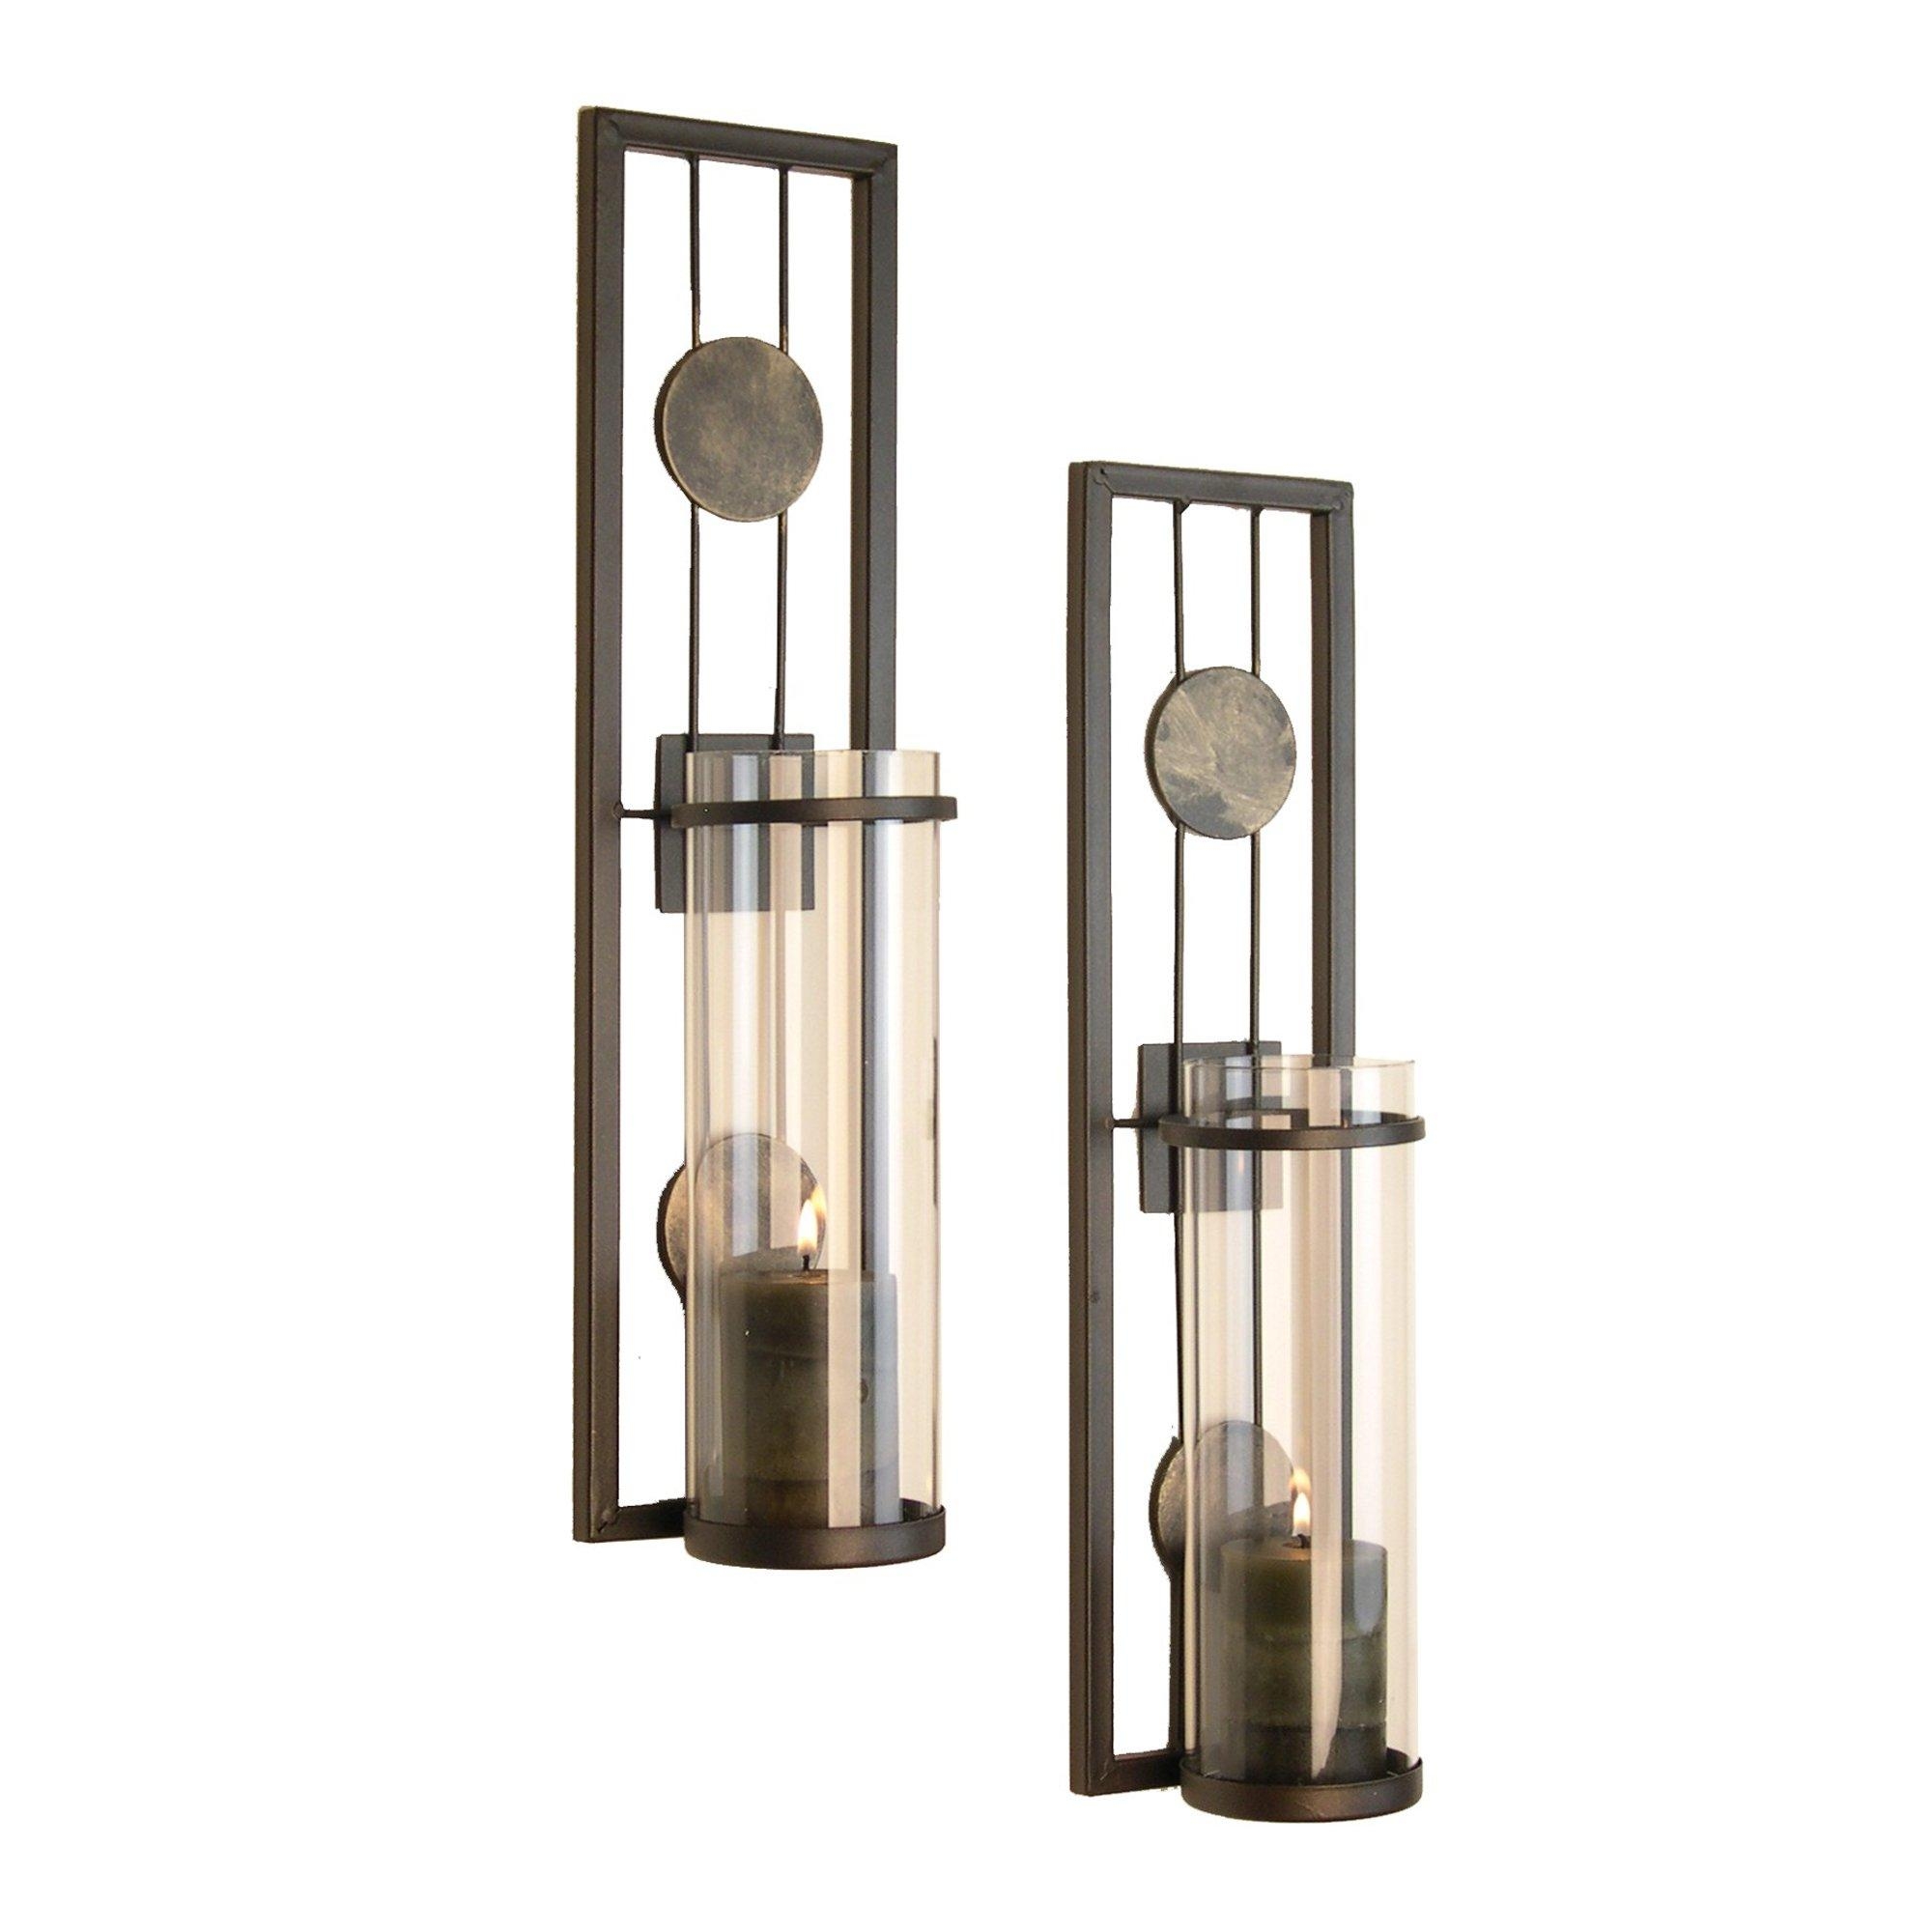 Set of 2 contemporary metal wall candle holder sconces d